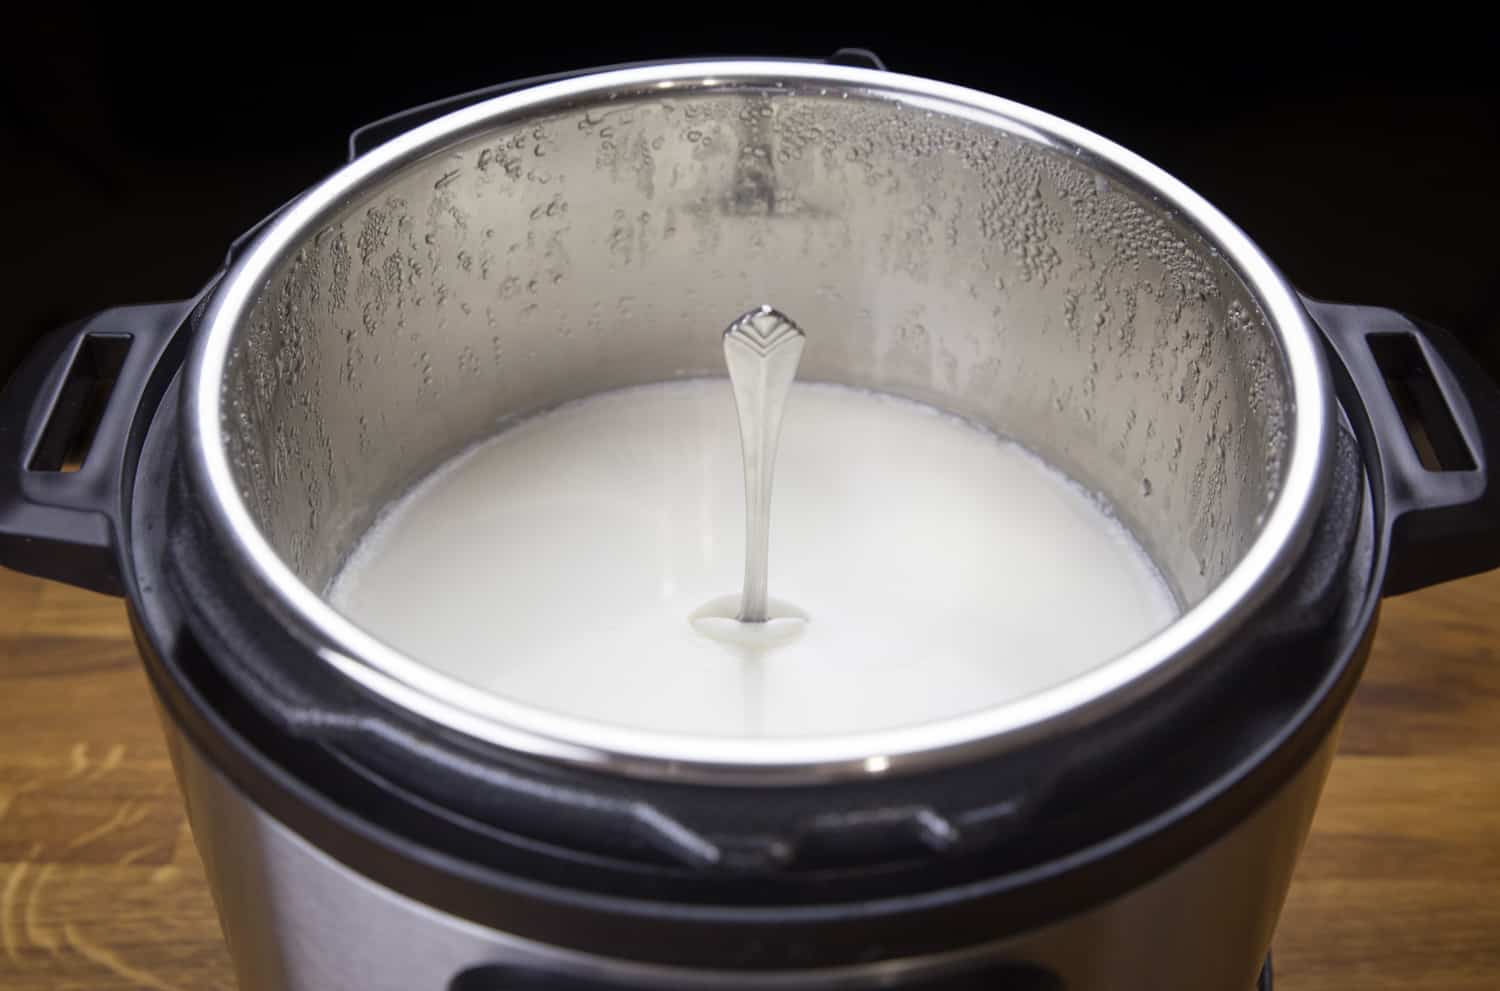 EASIEST How To Make Yogurt In The Instant Pot 